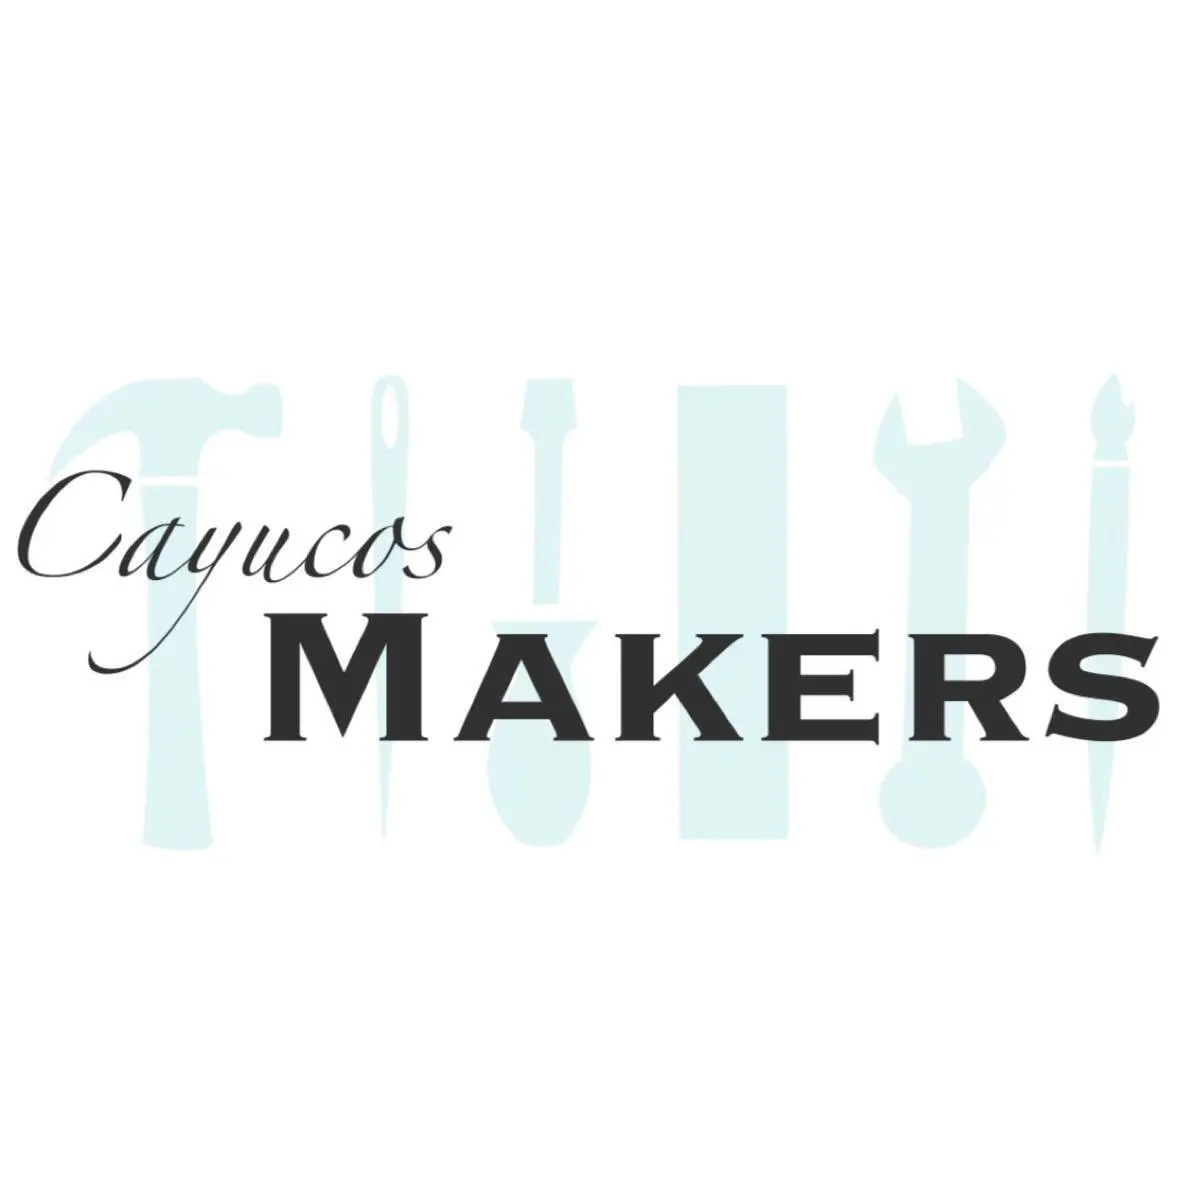 Cayucos Makers